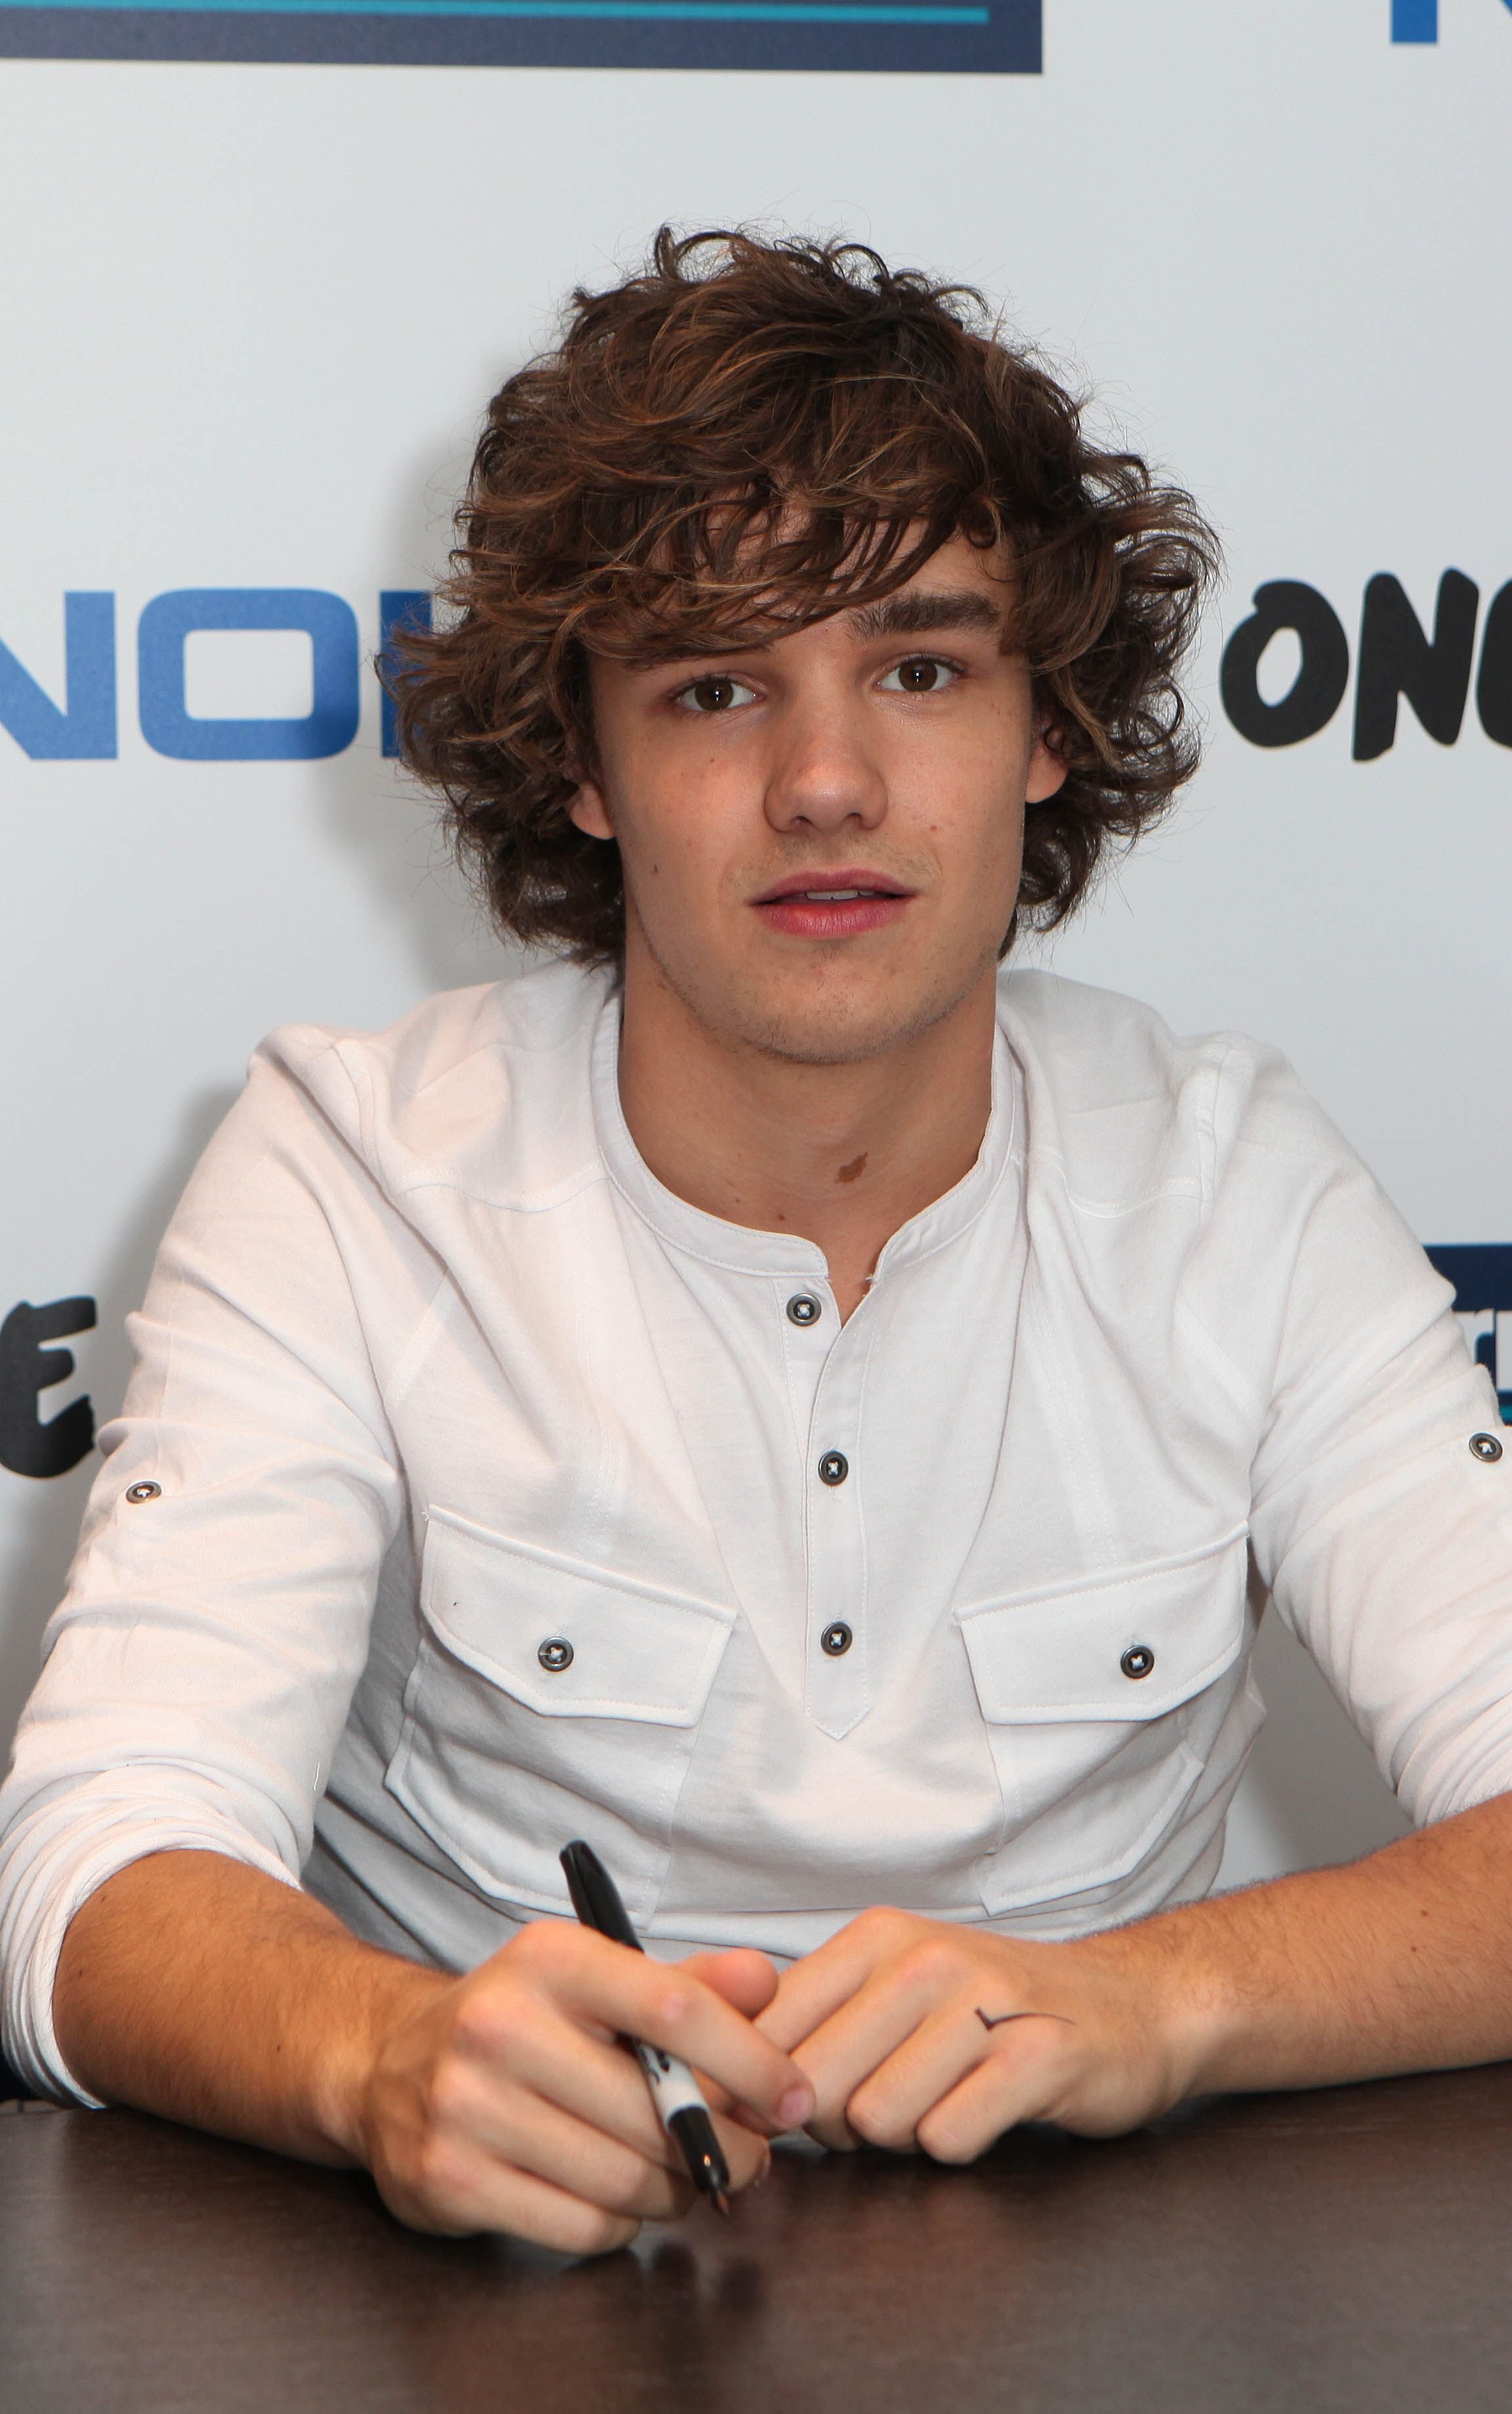 Liam Payne at The Carphone Warehouse on October 12, 2011 in London, England. | Source: Getty Images